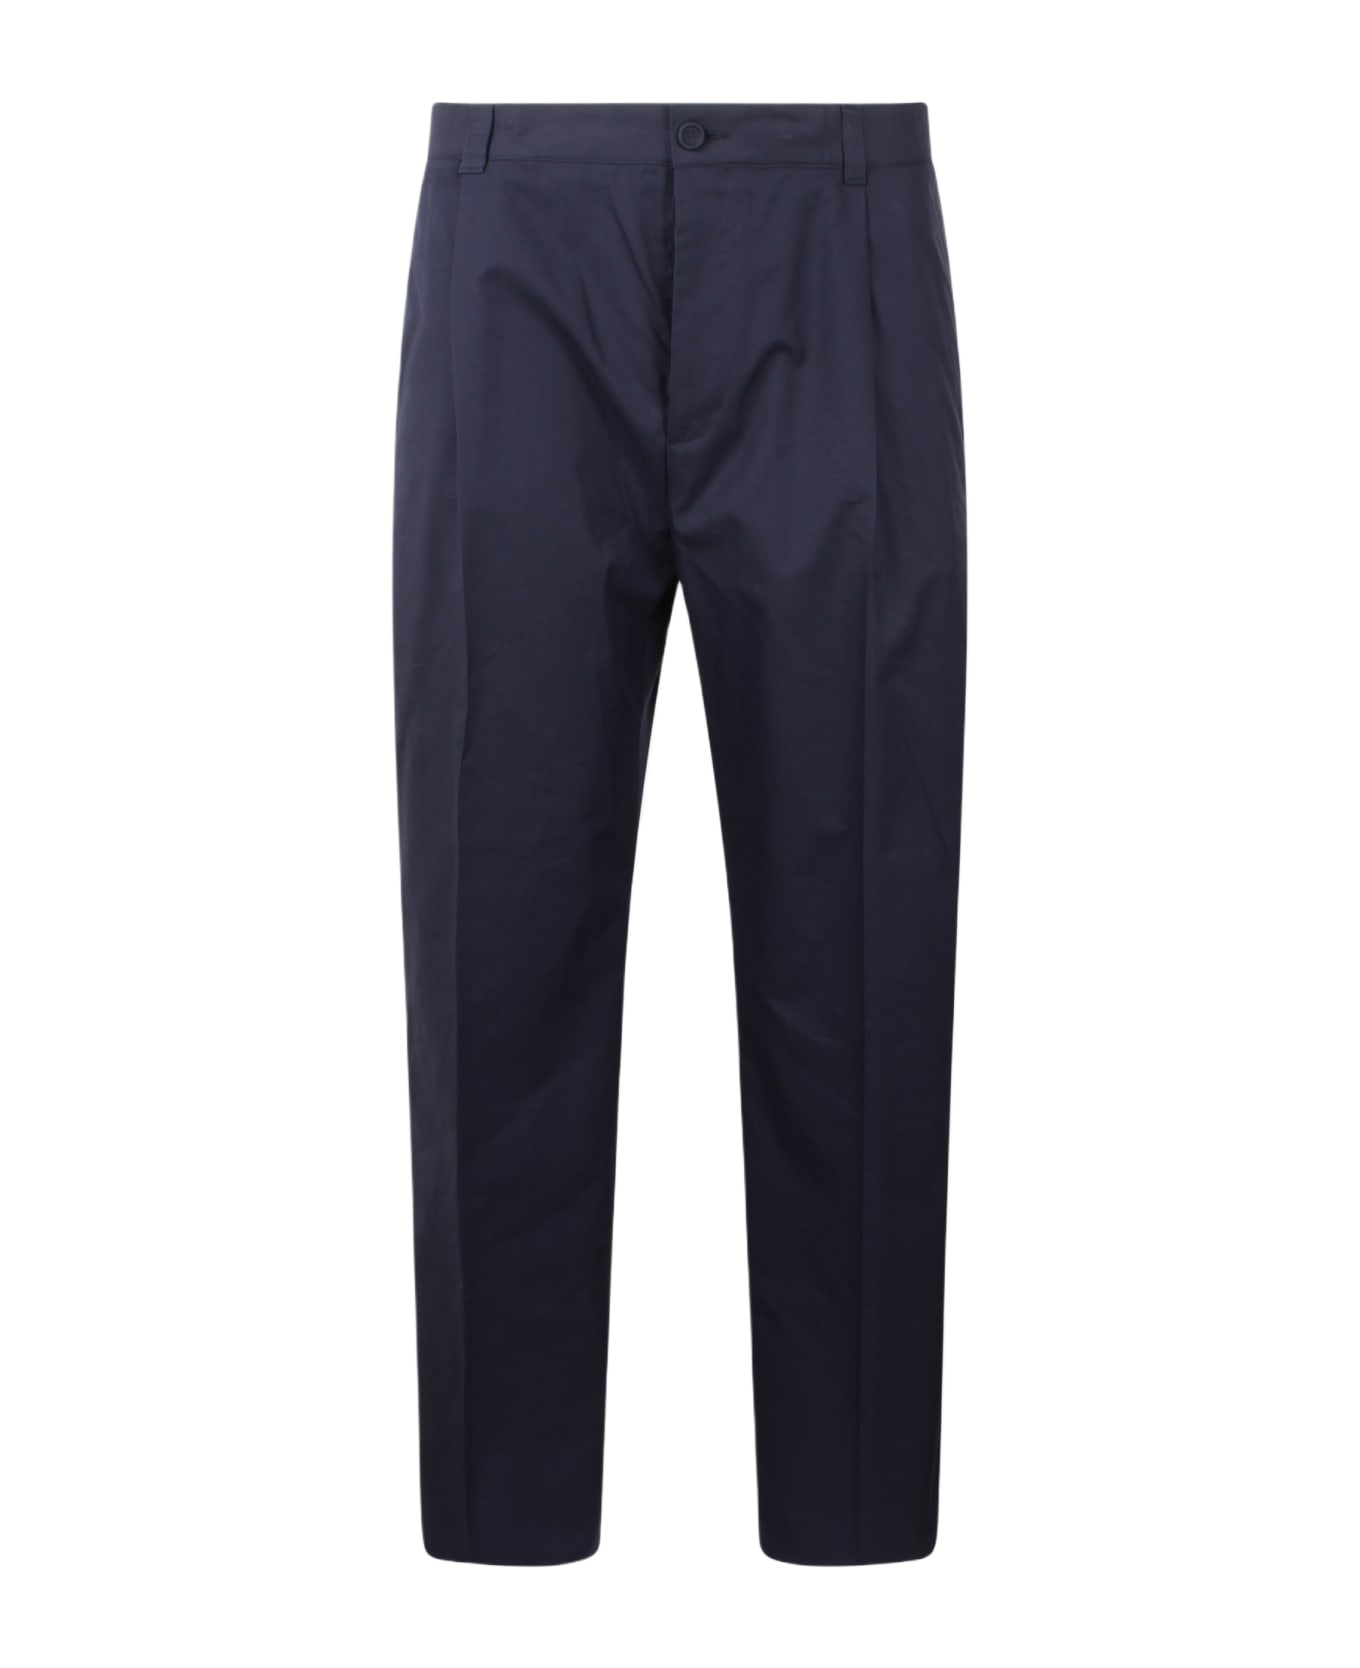 Dior Icons Pleated Pants - Blue ボトムス